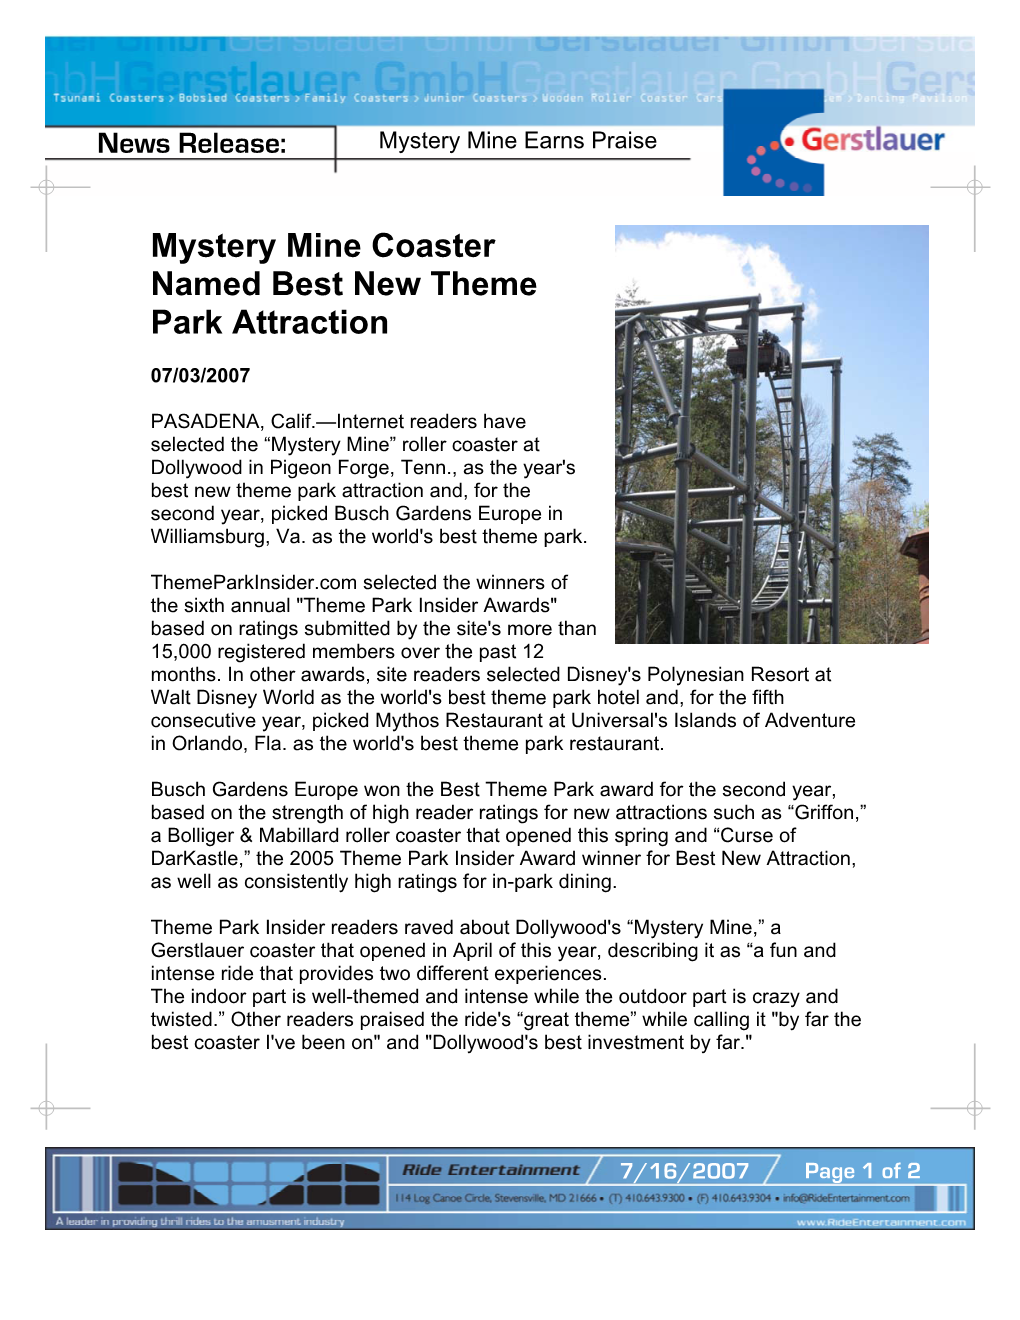 Mystery Mine Coaster Named Best New Theme Park Attraction